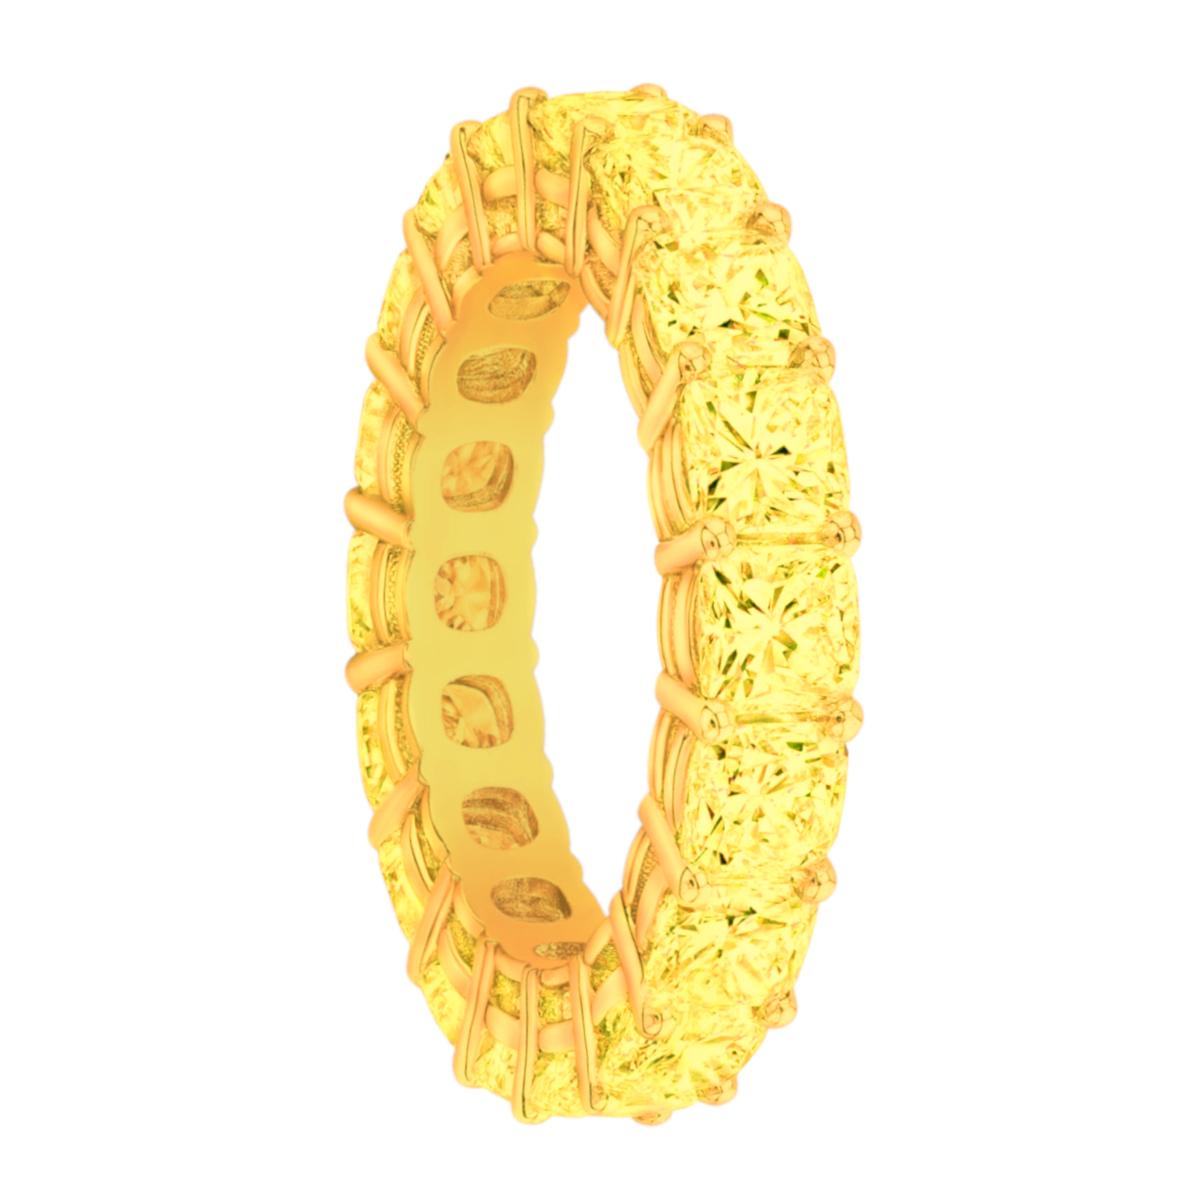 A Fancy Yellow Diamond Eternity Band in 18K Yellow Gold, showcases 18 perfectly matched Cushion shape diamonds. All a natural fancy yellow color, VS clarity and averaging over 35 points each, set in a single row shared prong special design 